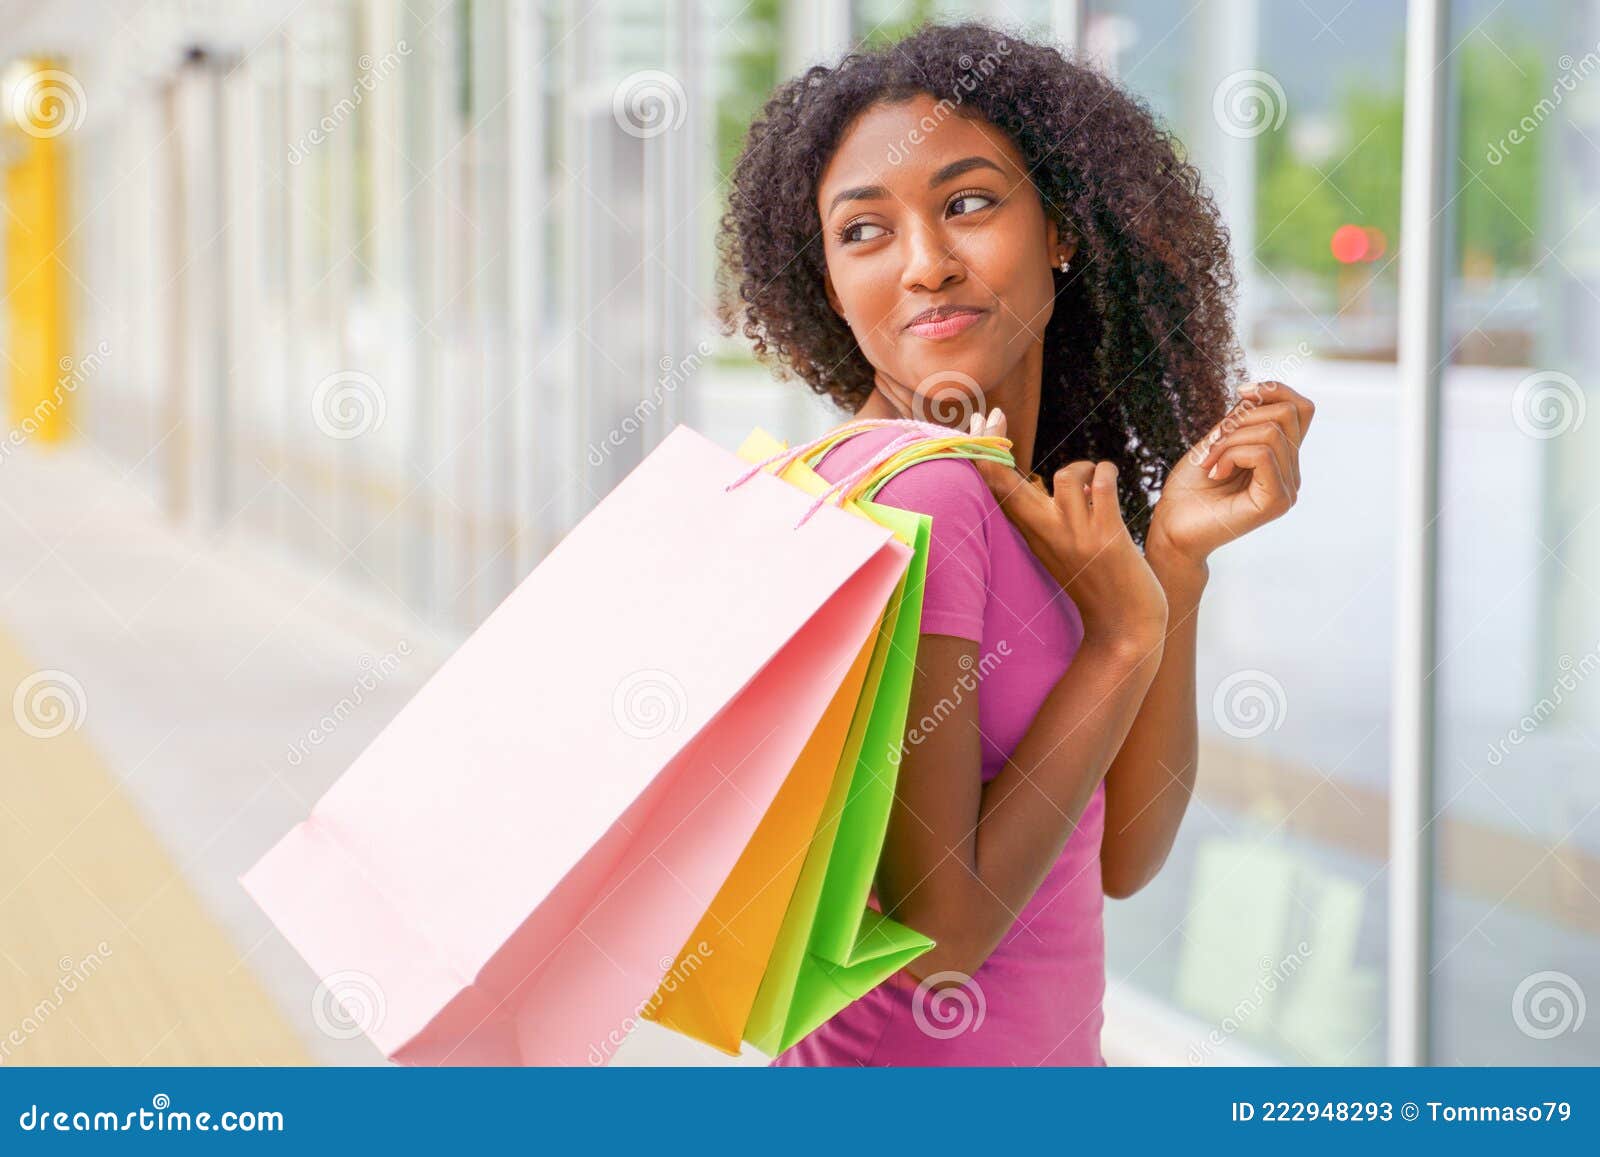 Happy Afro Woman Walking and Shopping in the City Stock Image - Image ...